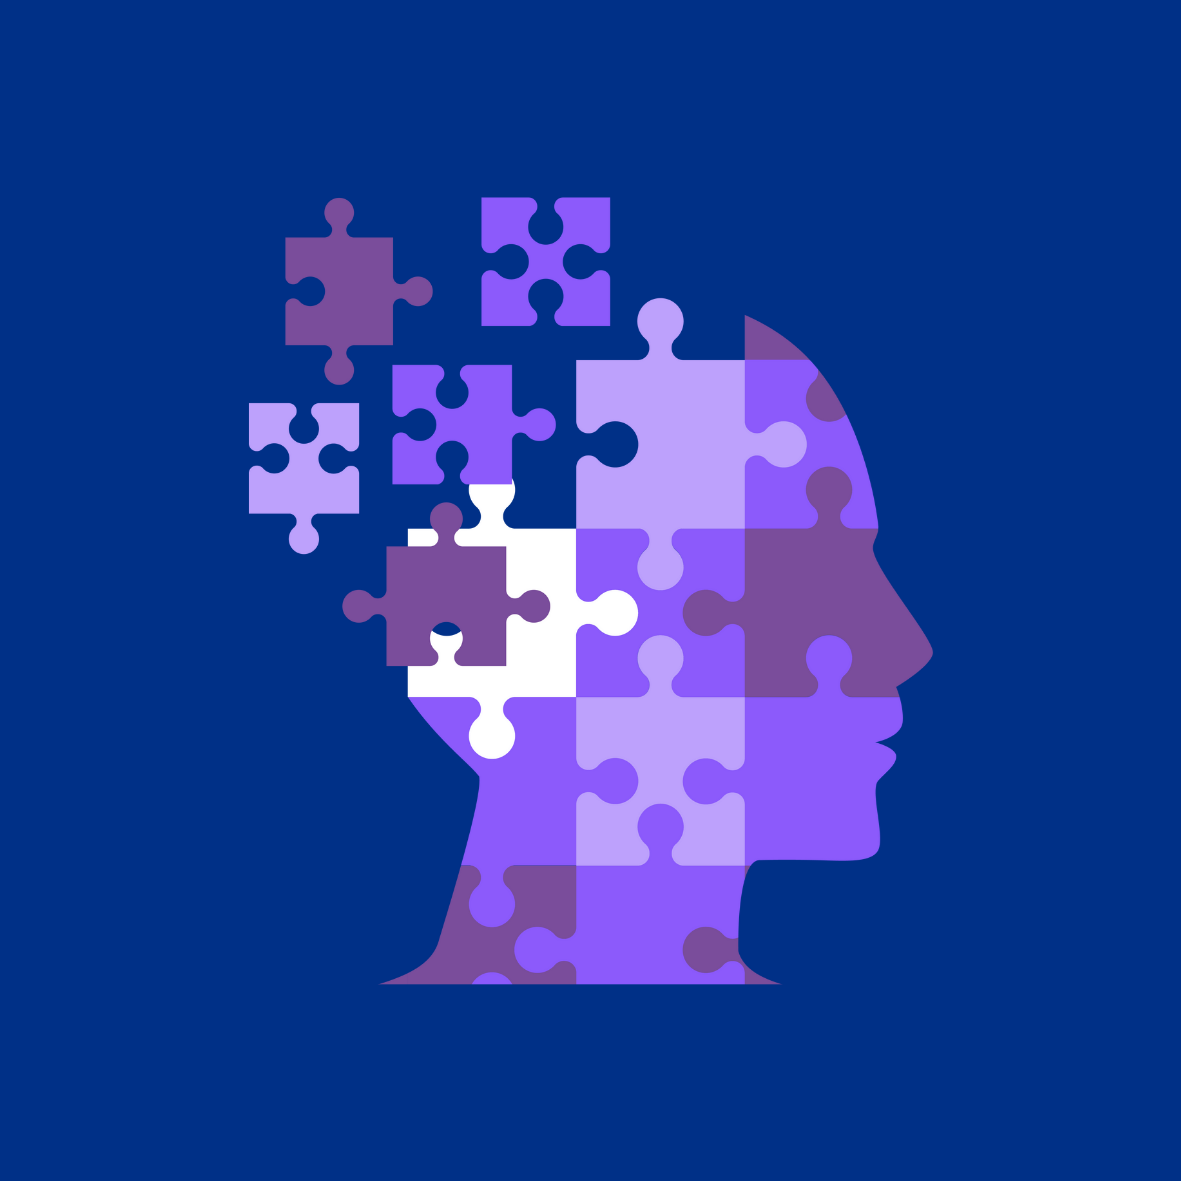 A Head Shape with Jigsaw Pieces to Represent Dementia